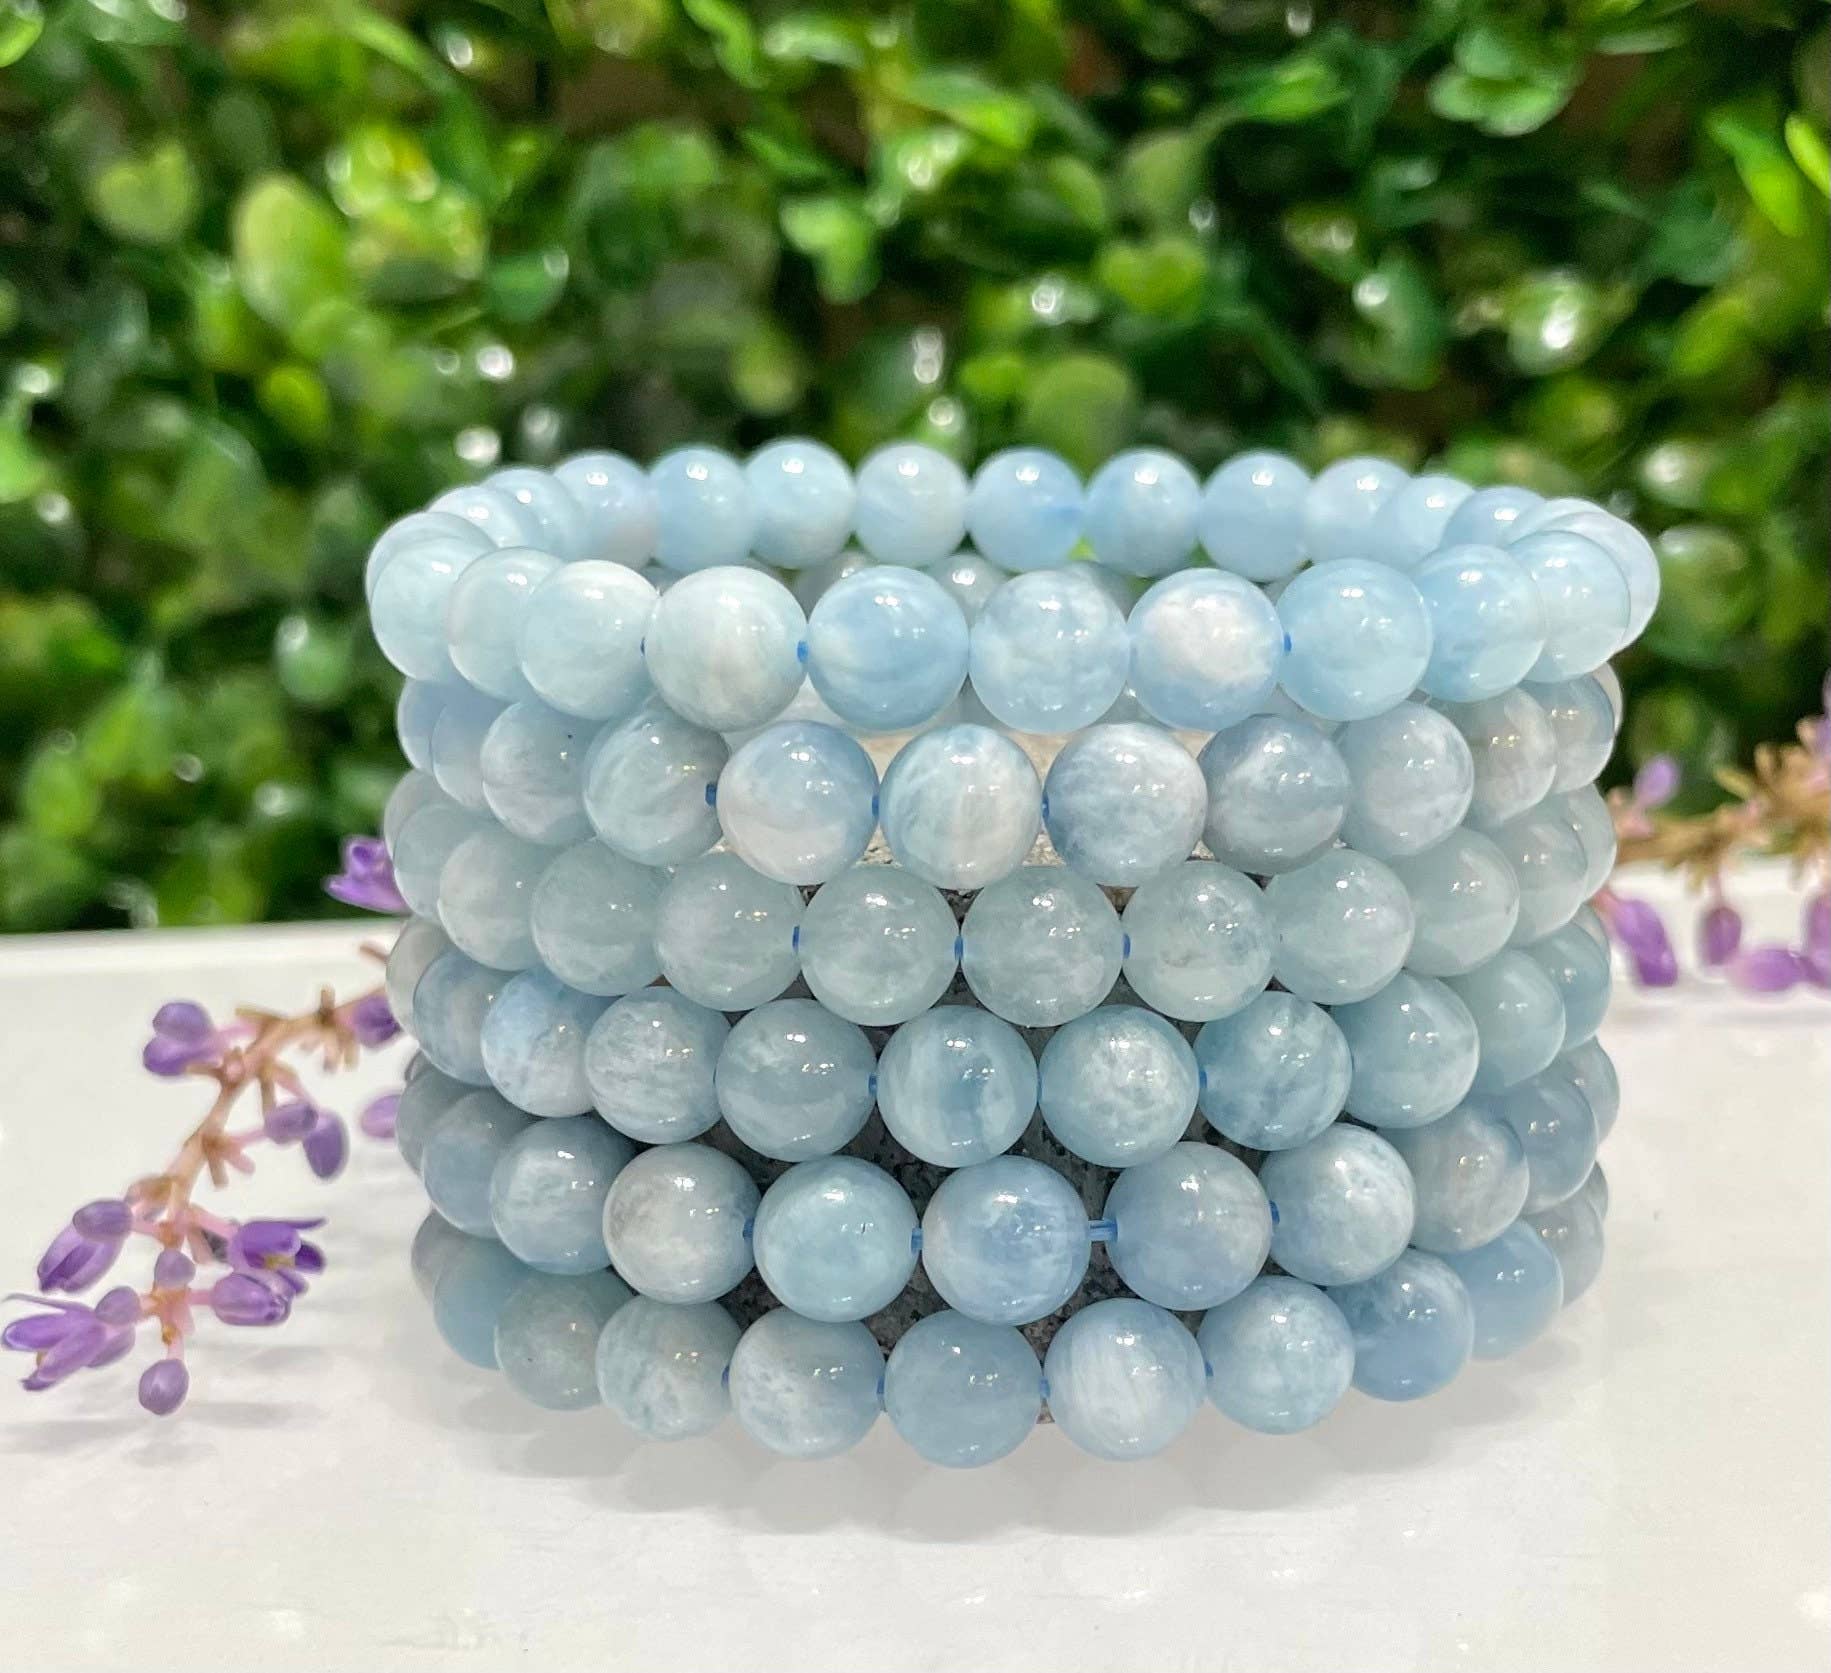 Natural Aquamarine 8mm 7.5” Crystal Healing Stretch Bracelet - Coco and lulu boutique 